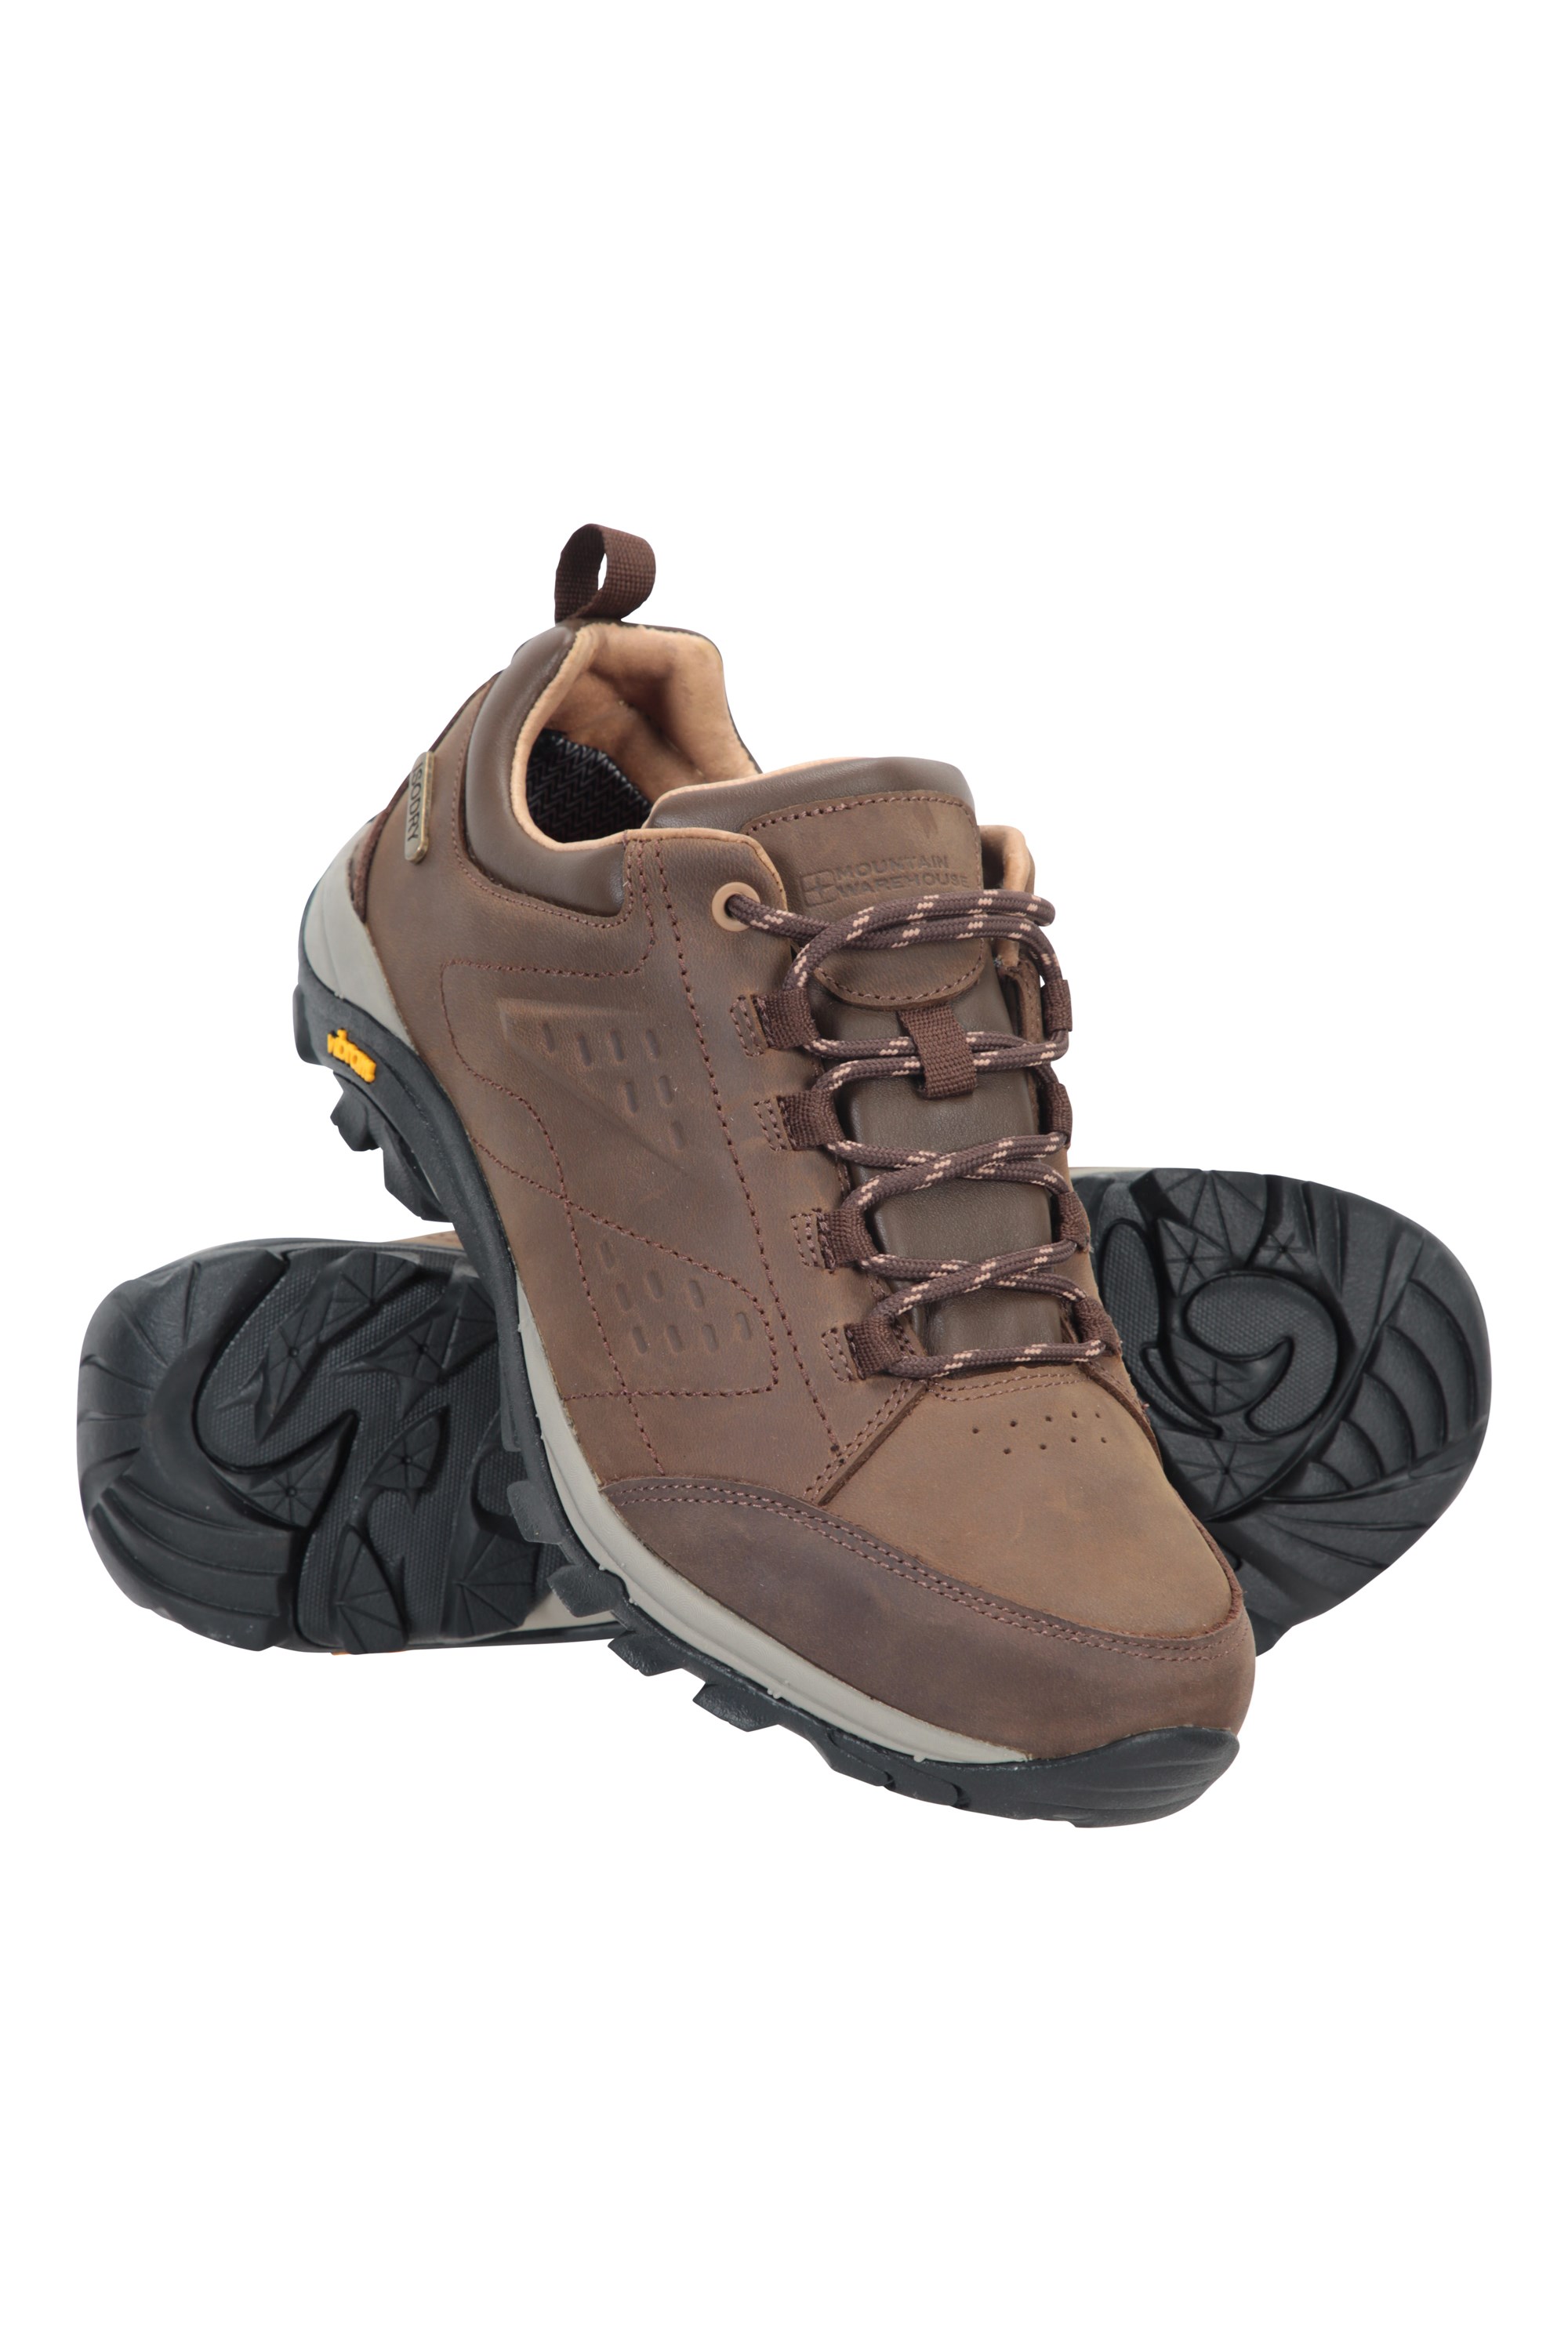 Extreme Pioneer Womens Walking Shoes - Brown